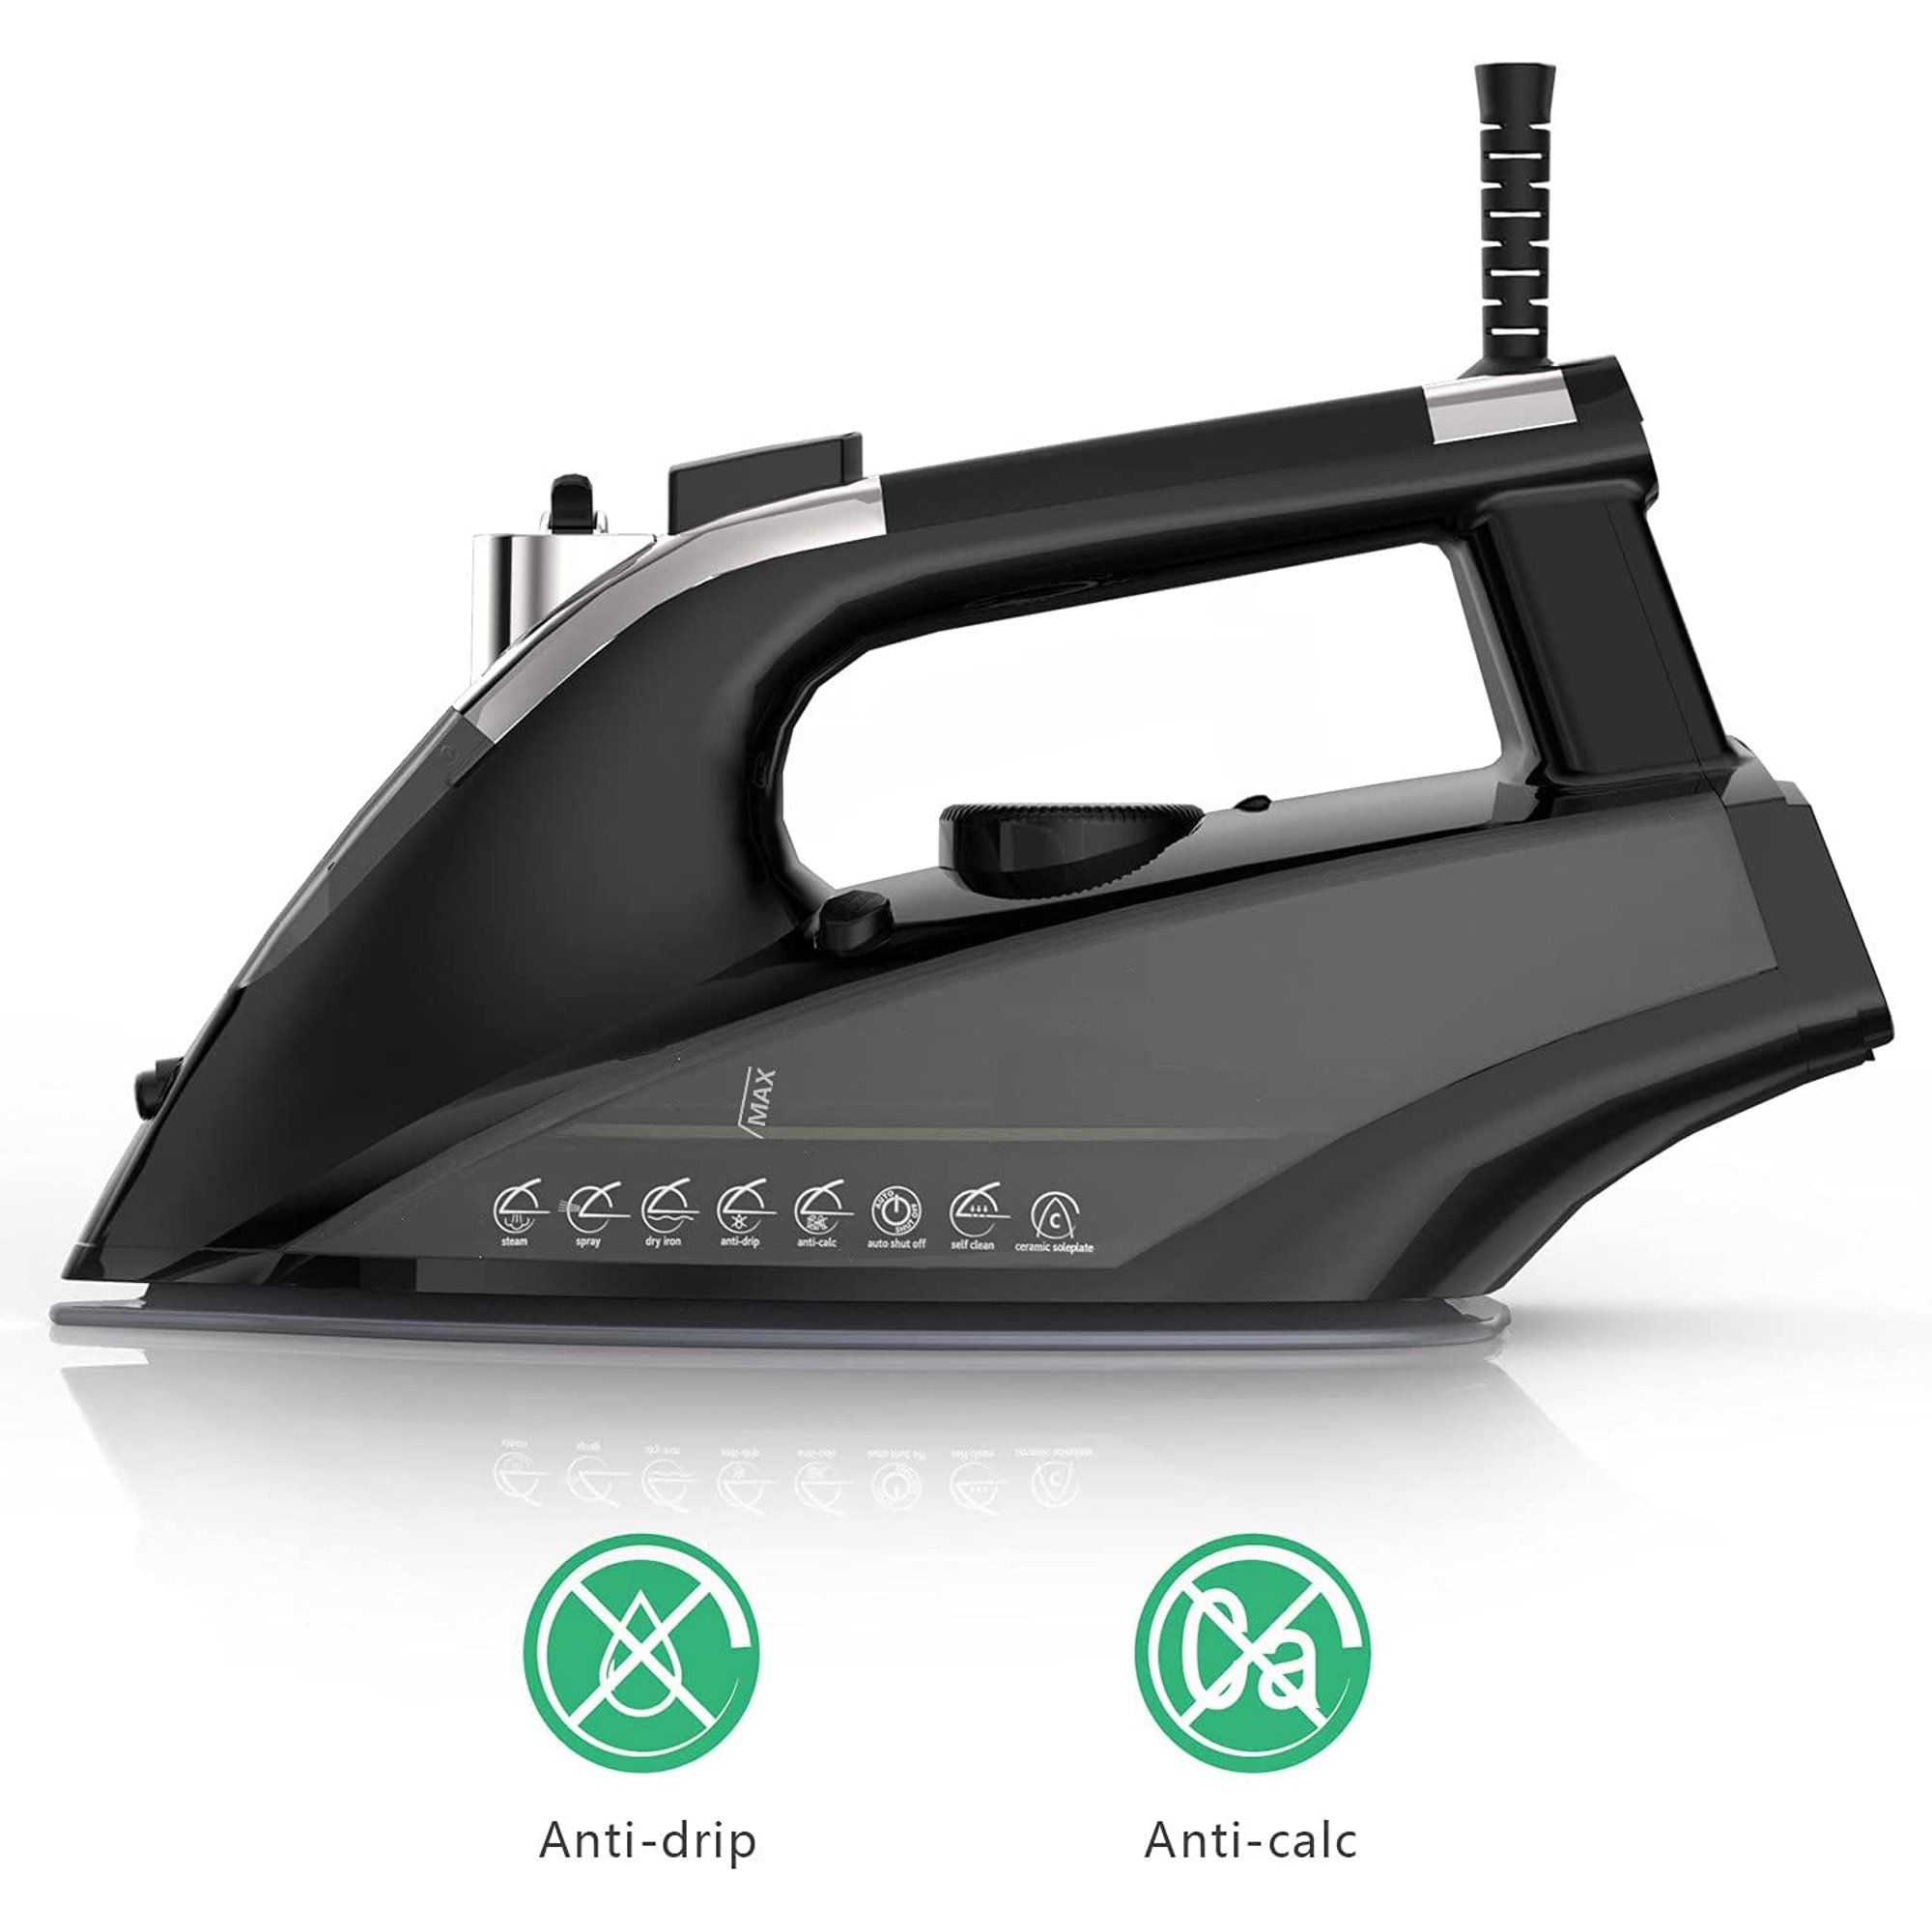 Moosoo 1800 W Professional Steam - Dry Iron Lightweight Portable Steam Iron with Auto-Off Protect, Anti-Drip, Size: 12.00 x 6.50 x 4.85, Black